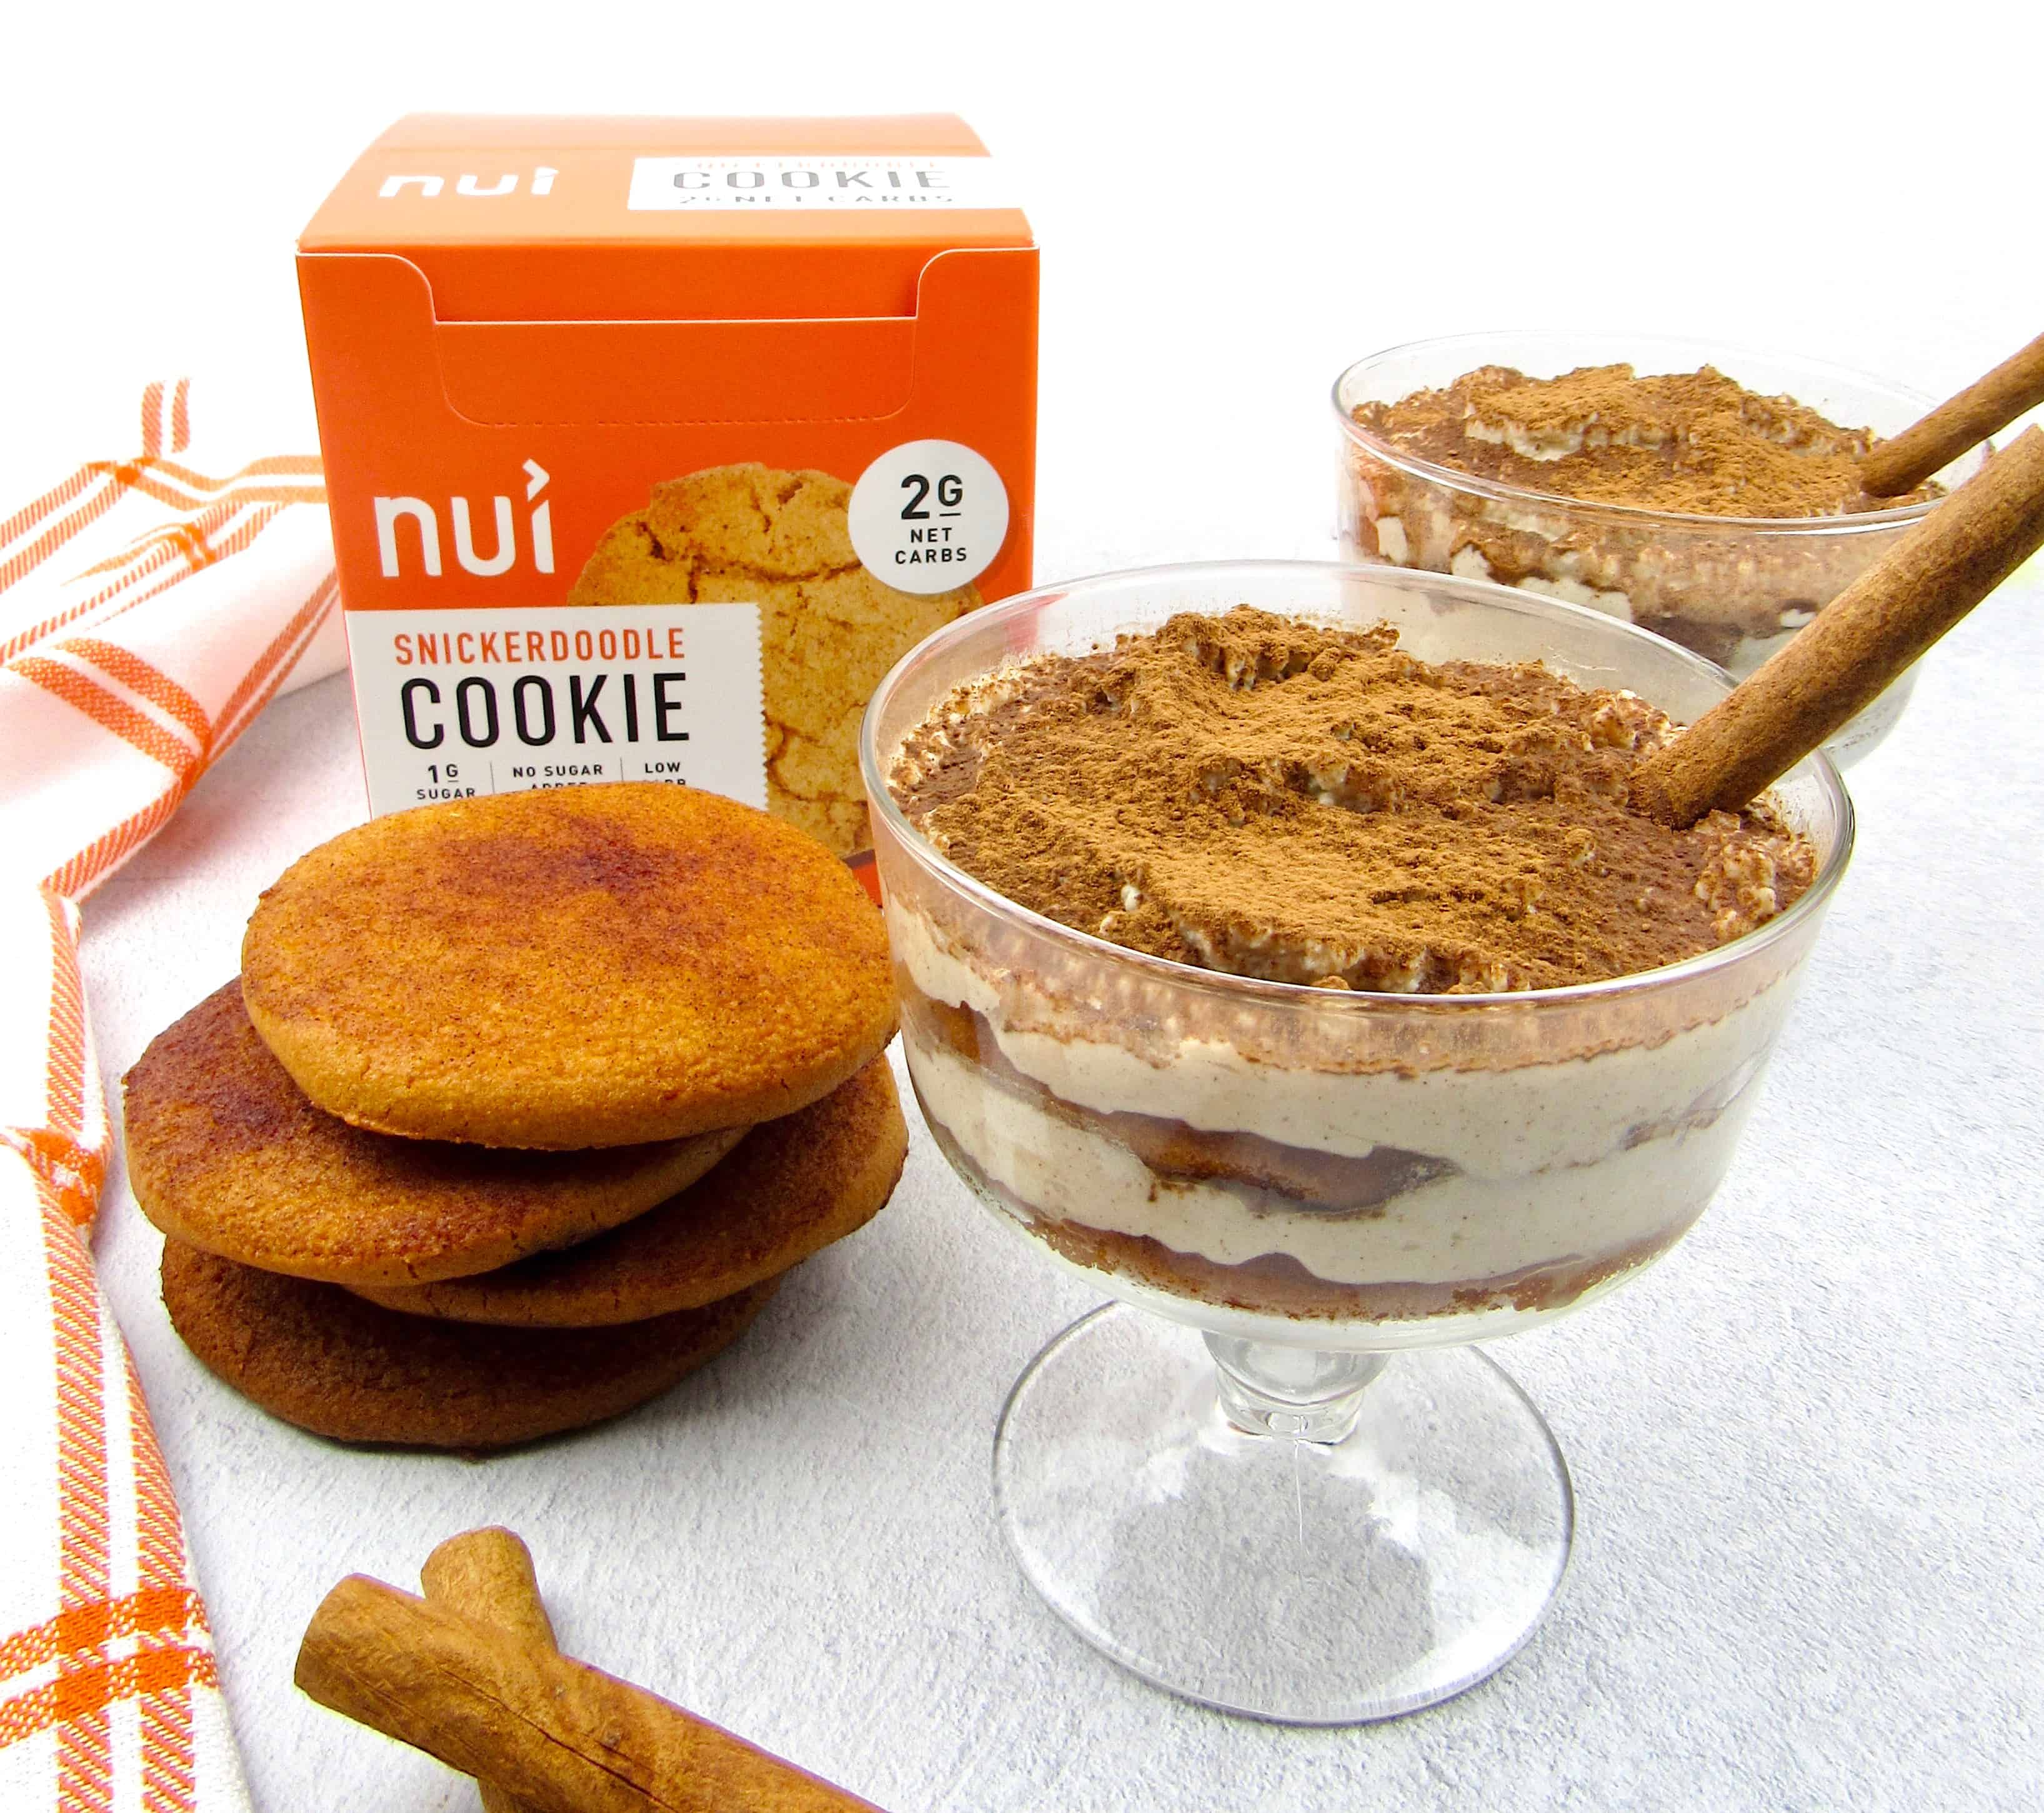 snickerdoodle tiramisu in glasses with stack of cookies next to